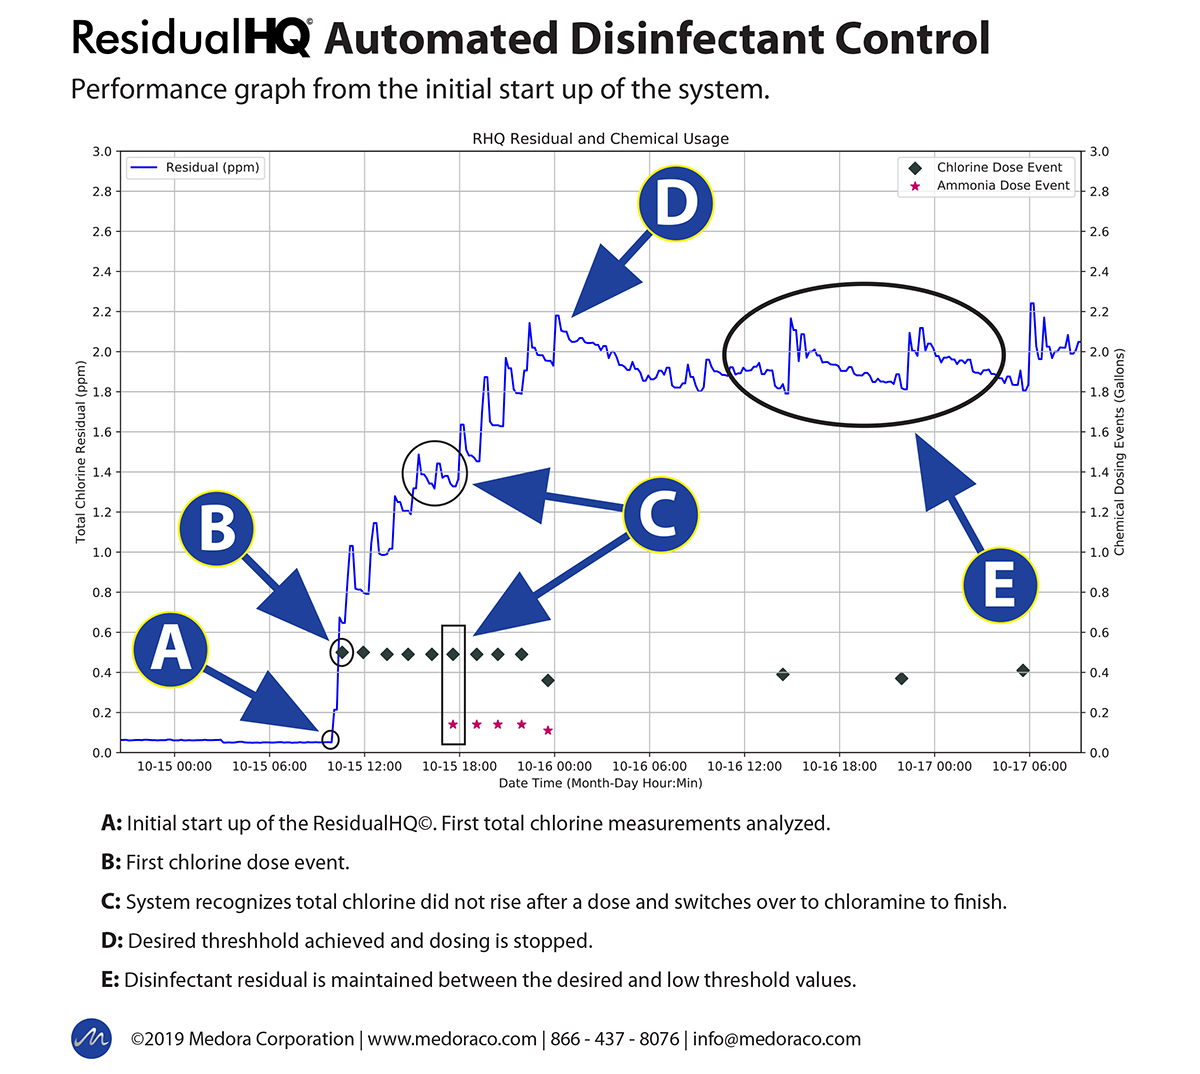 image showing performance data for the ResidualHQ Automated Disinfectant Control System.